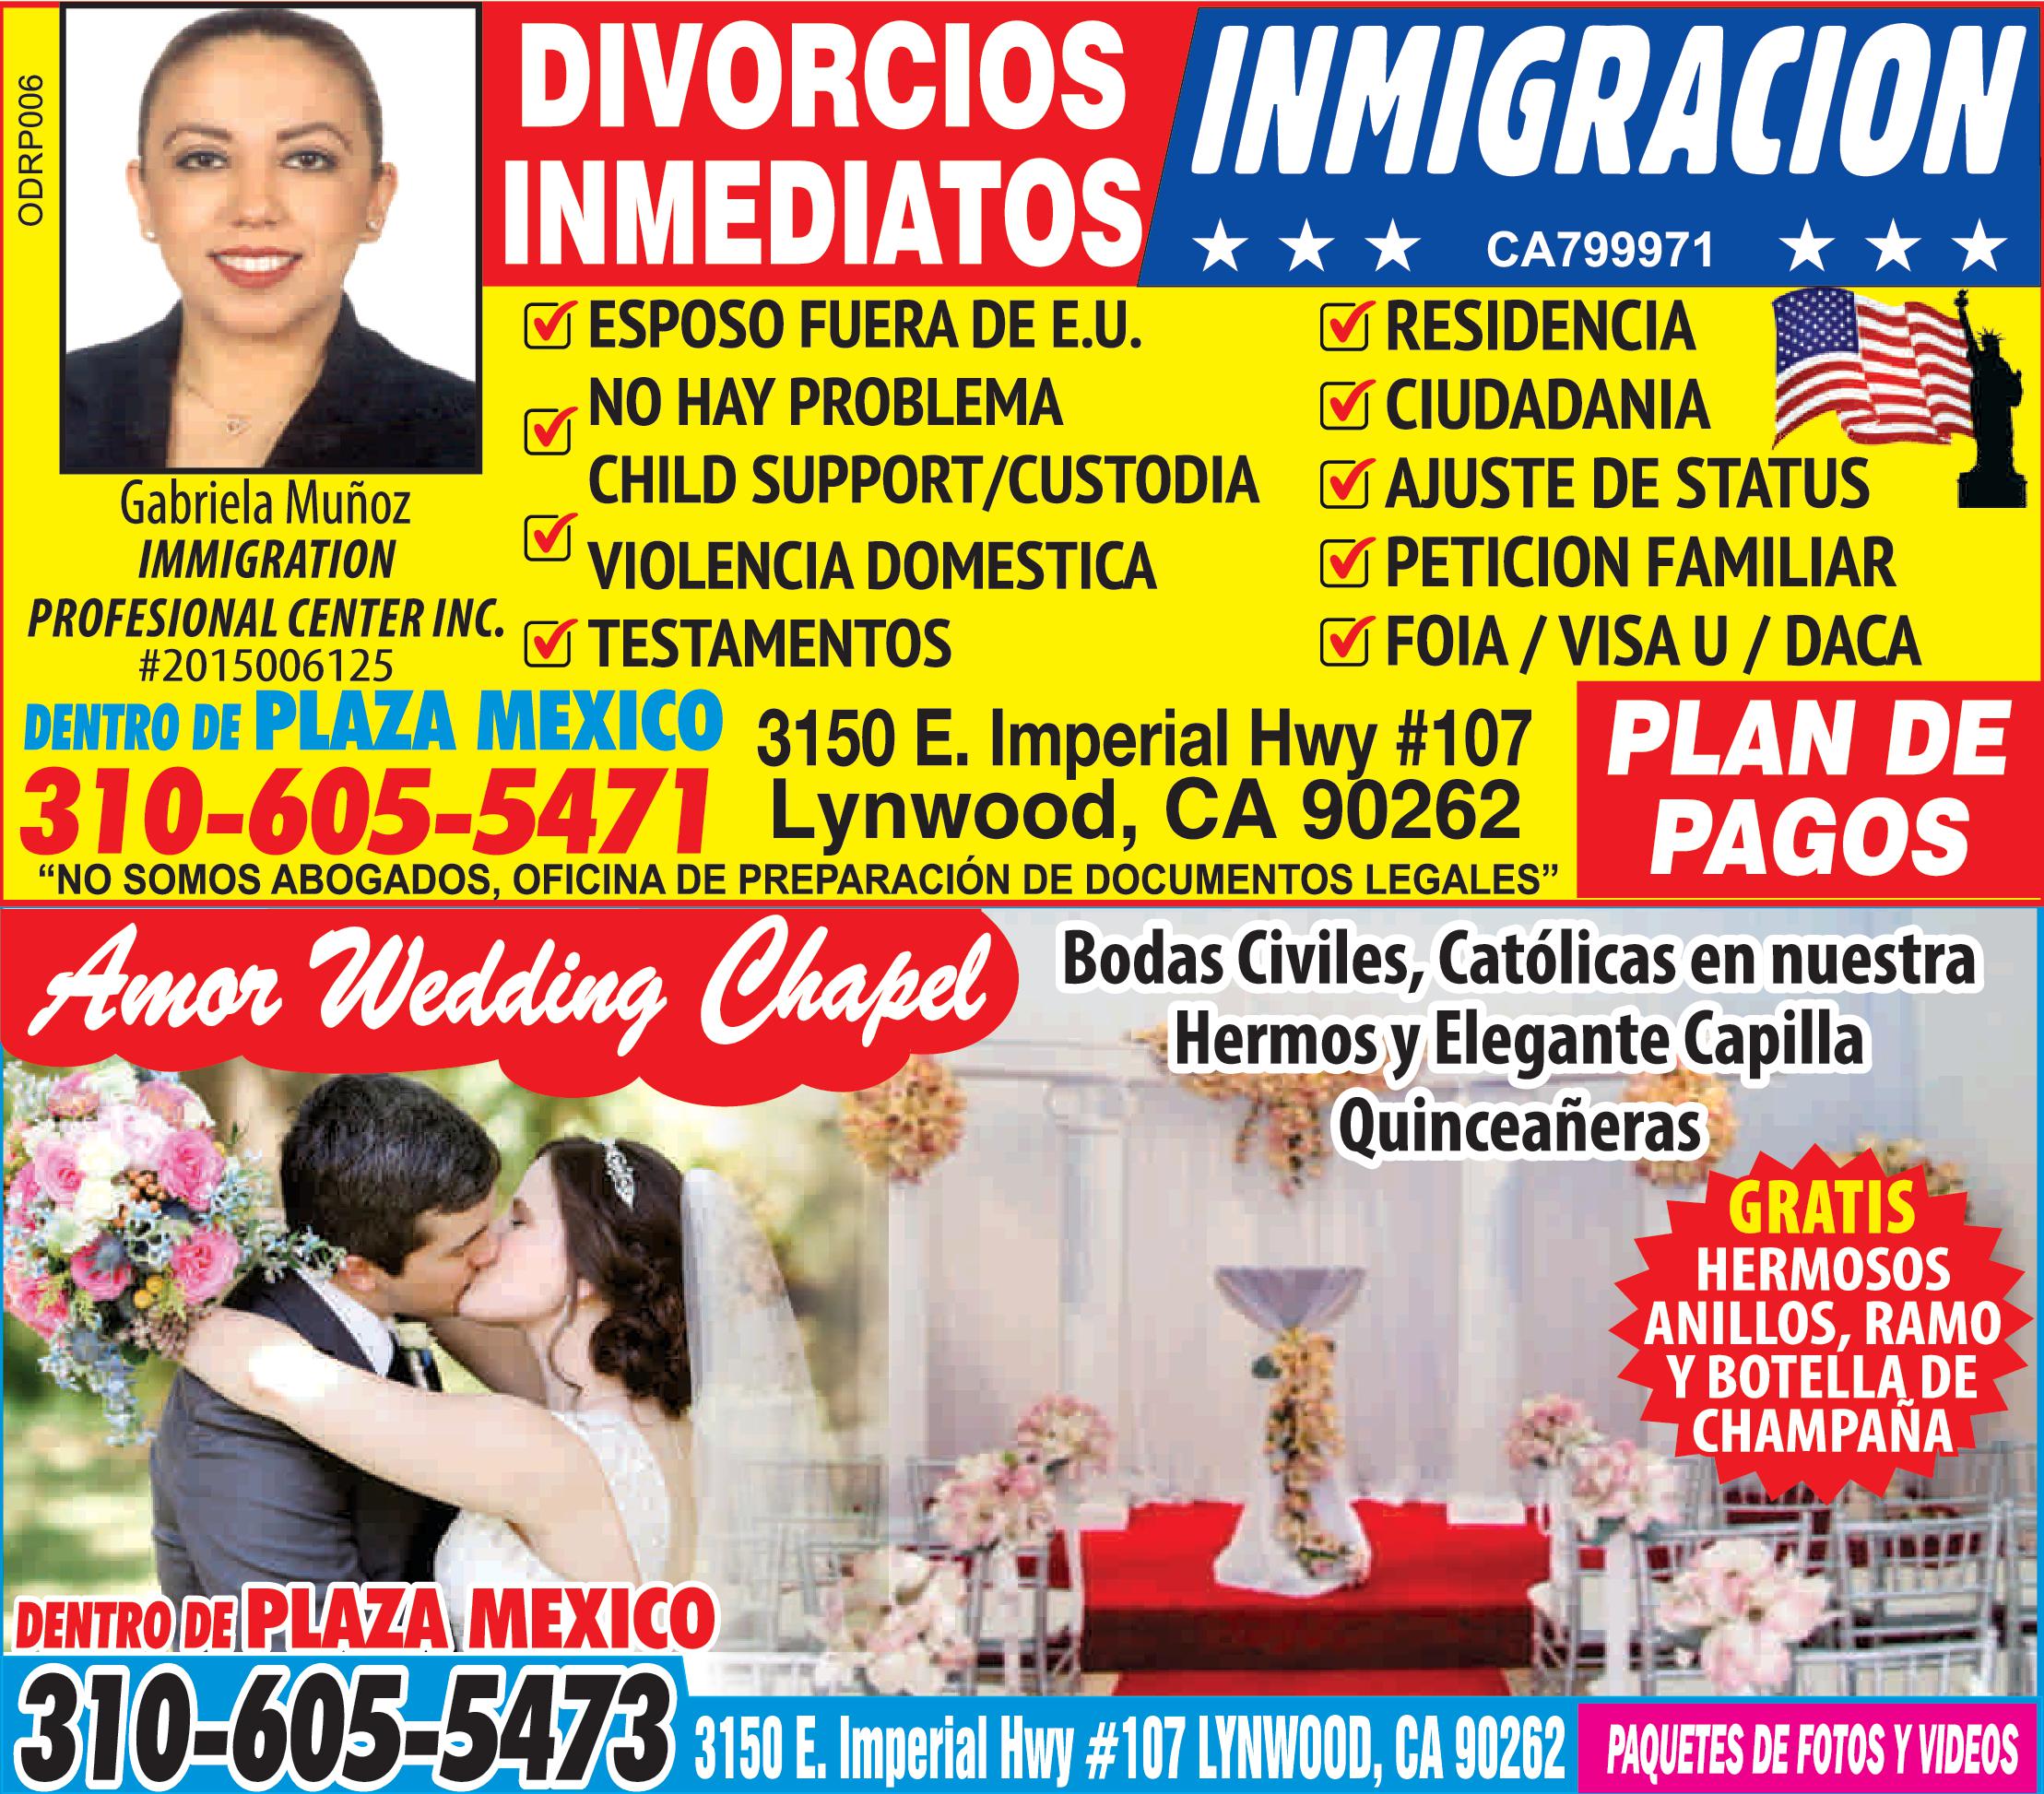 Immigration Profesional Center